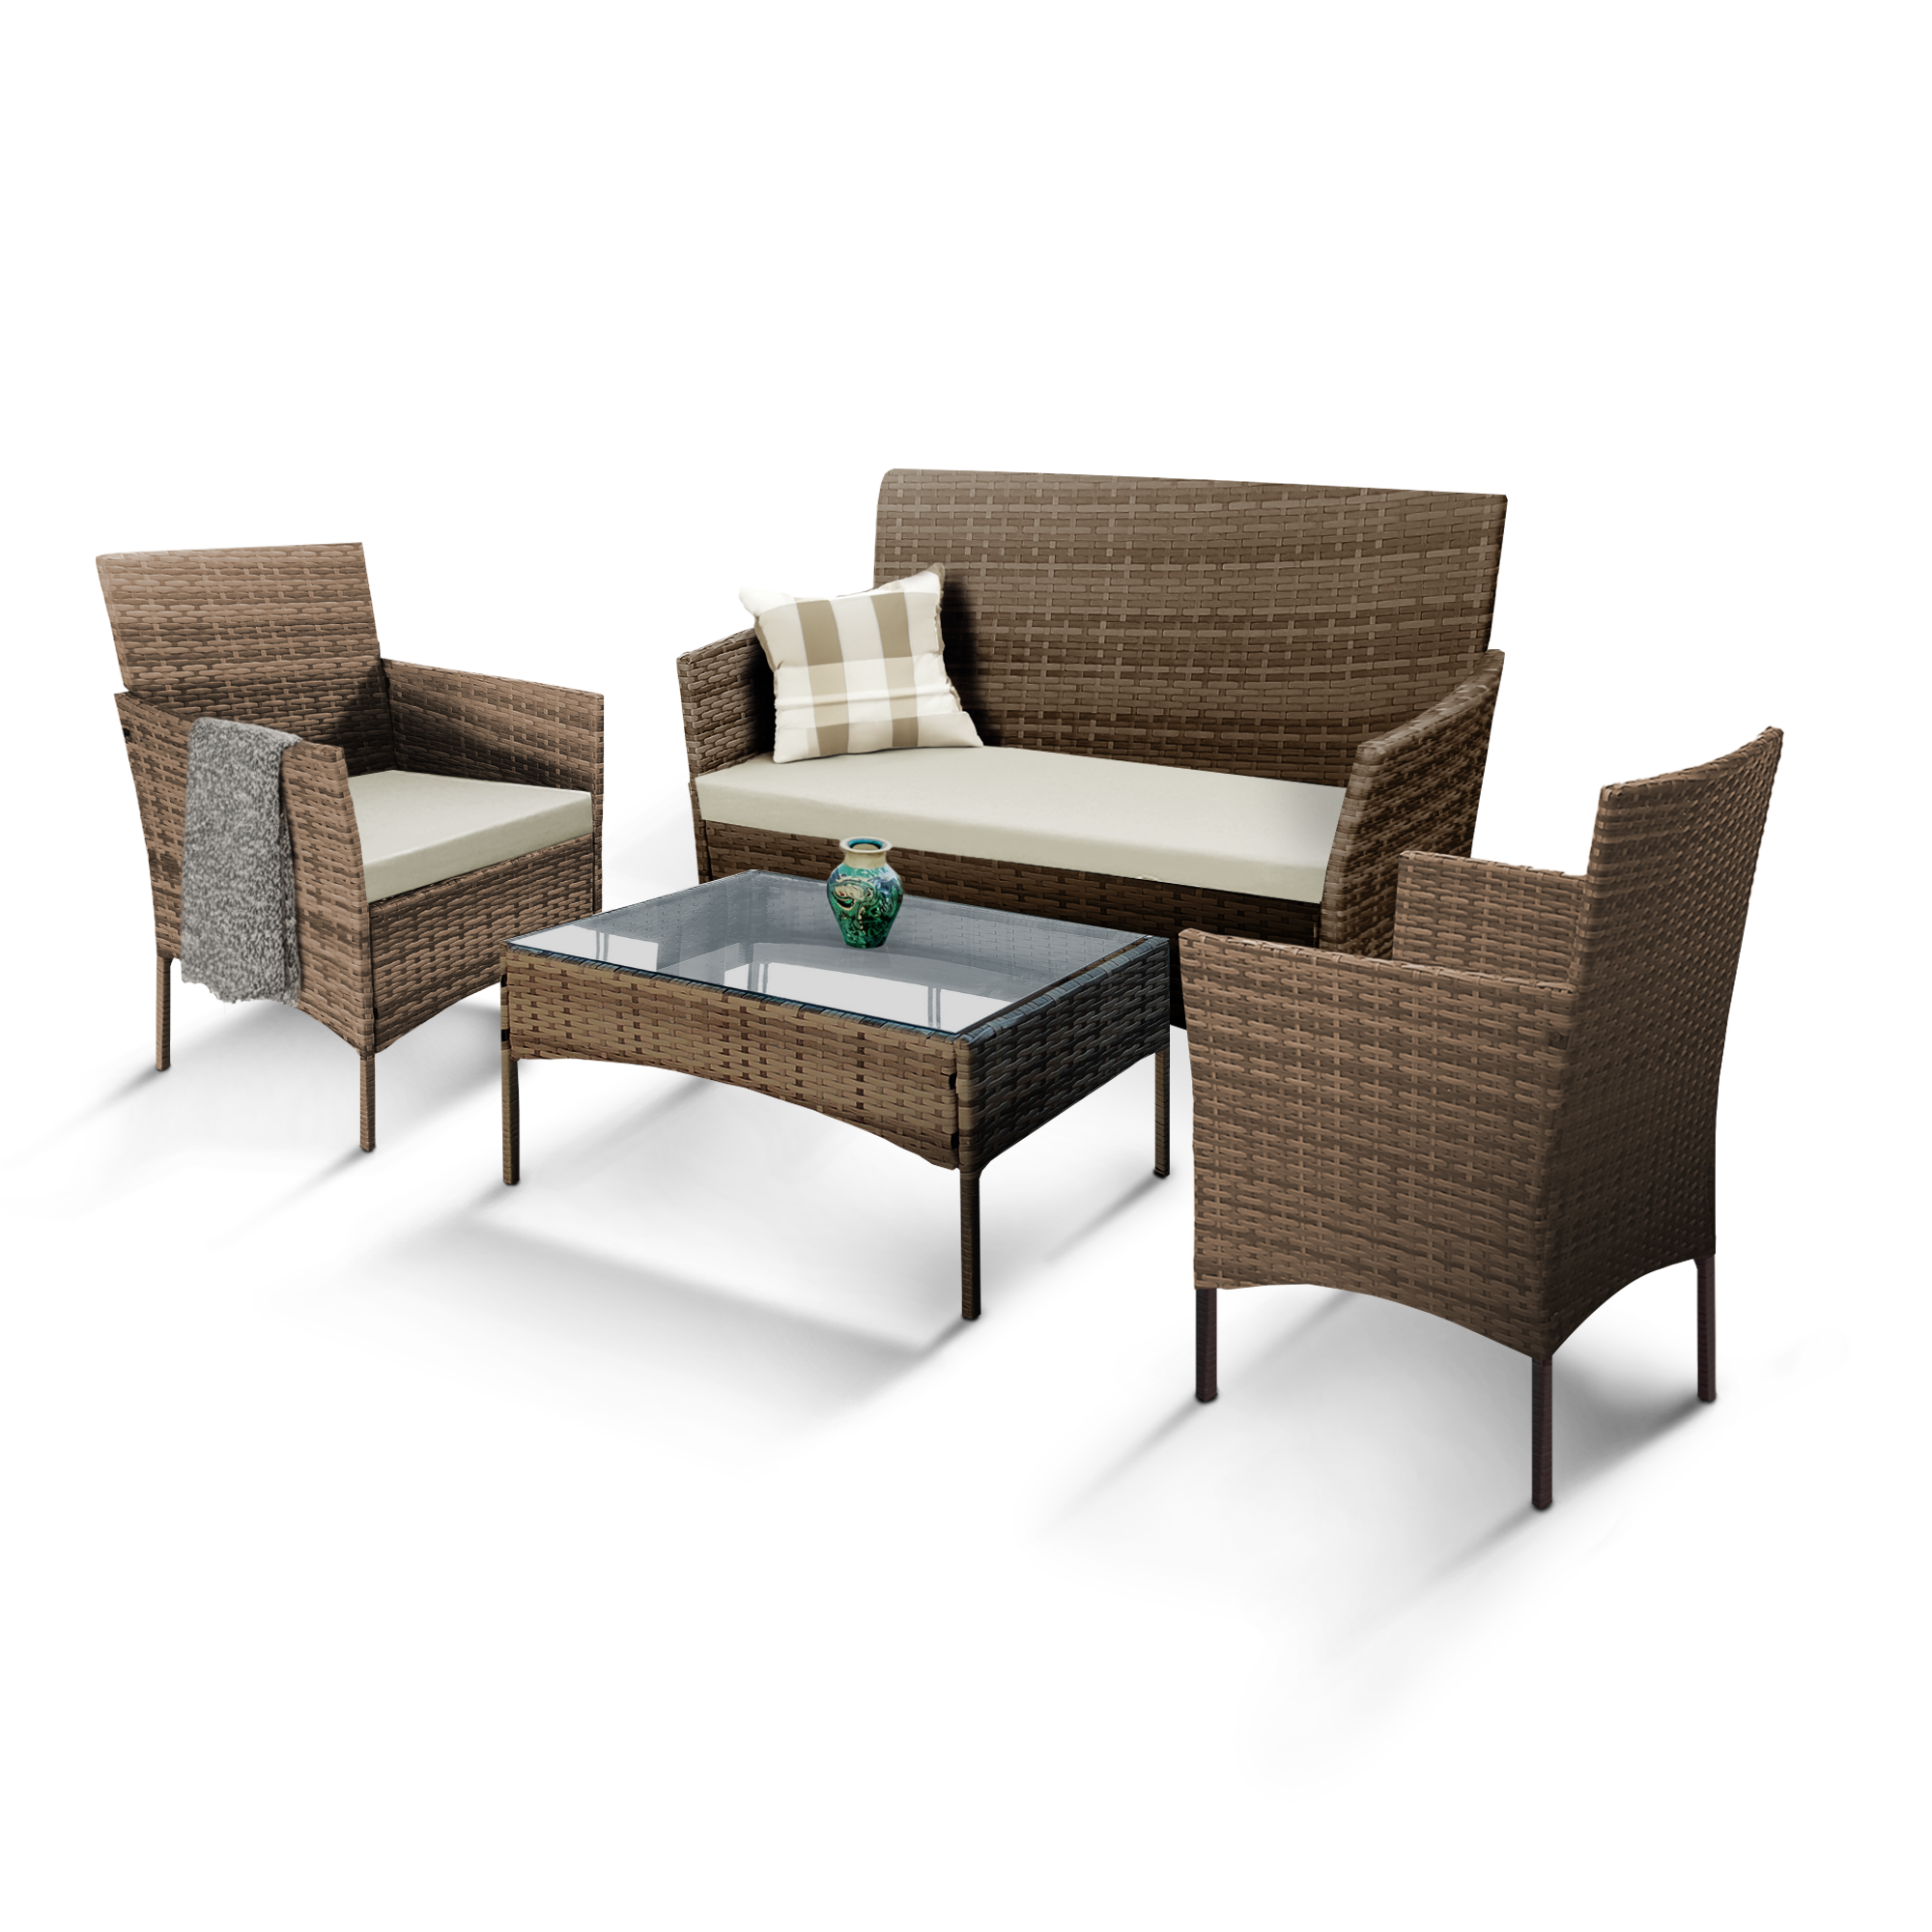 4-Piece Rattan Garden Furniture Set - Outdoor Lounger Sofa, Stackable Chairs & Bistro Table